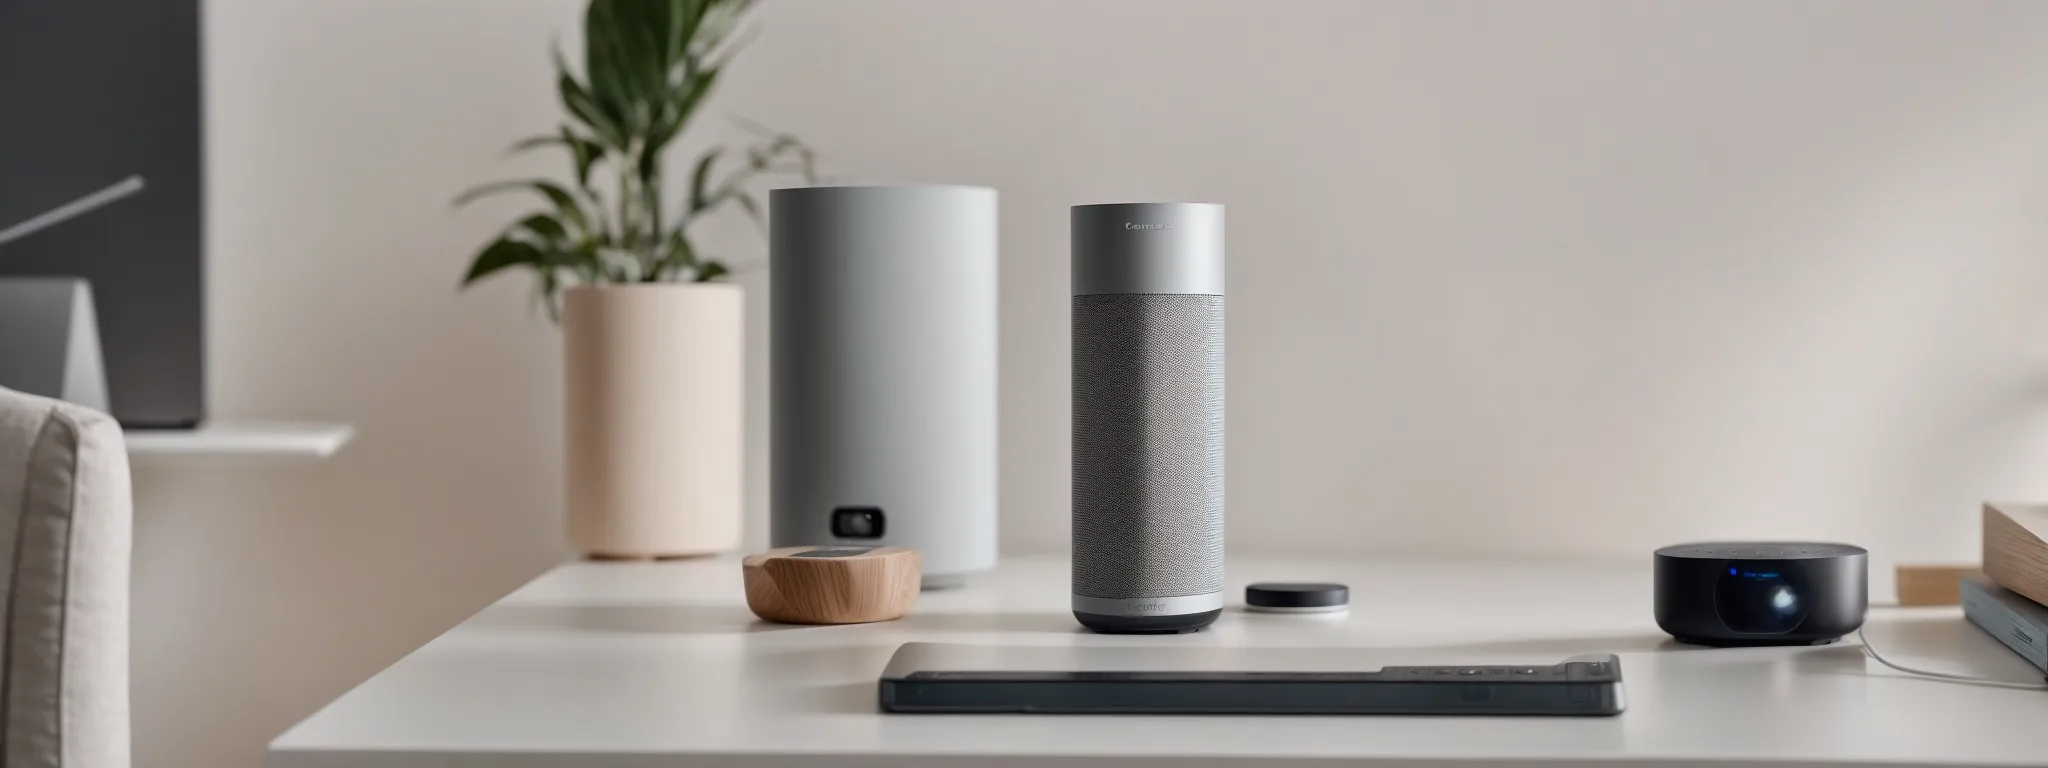 a user converses with a sleek smart speaker on a modern, minimalist desk, symbolizing the integration of voice search technology.